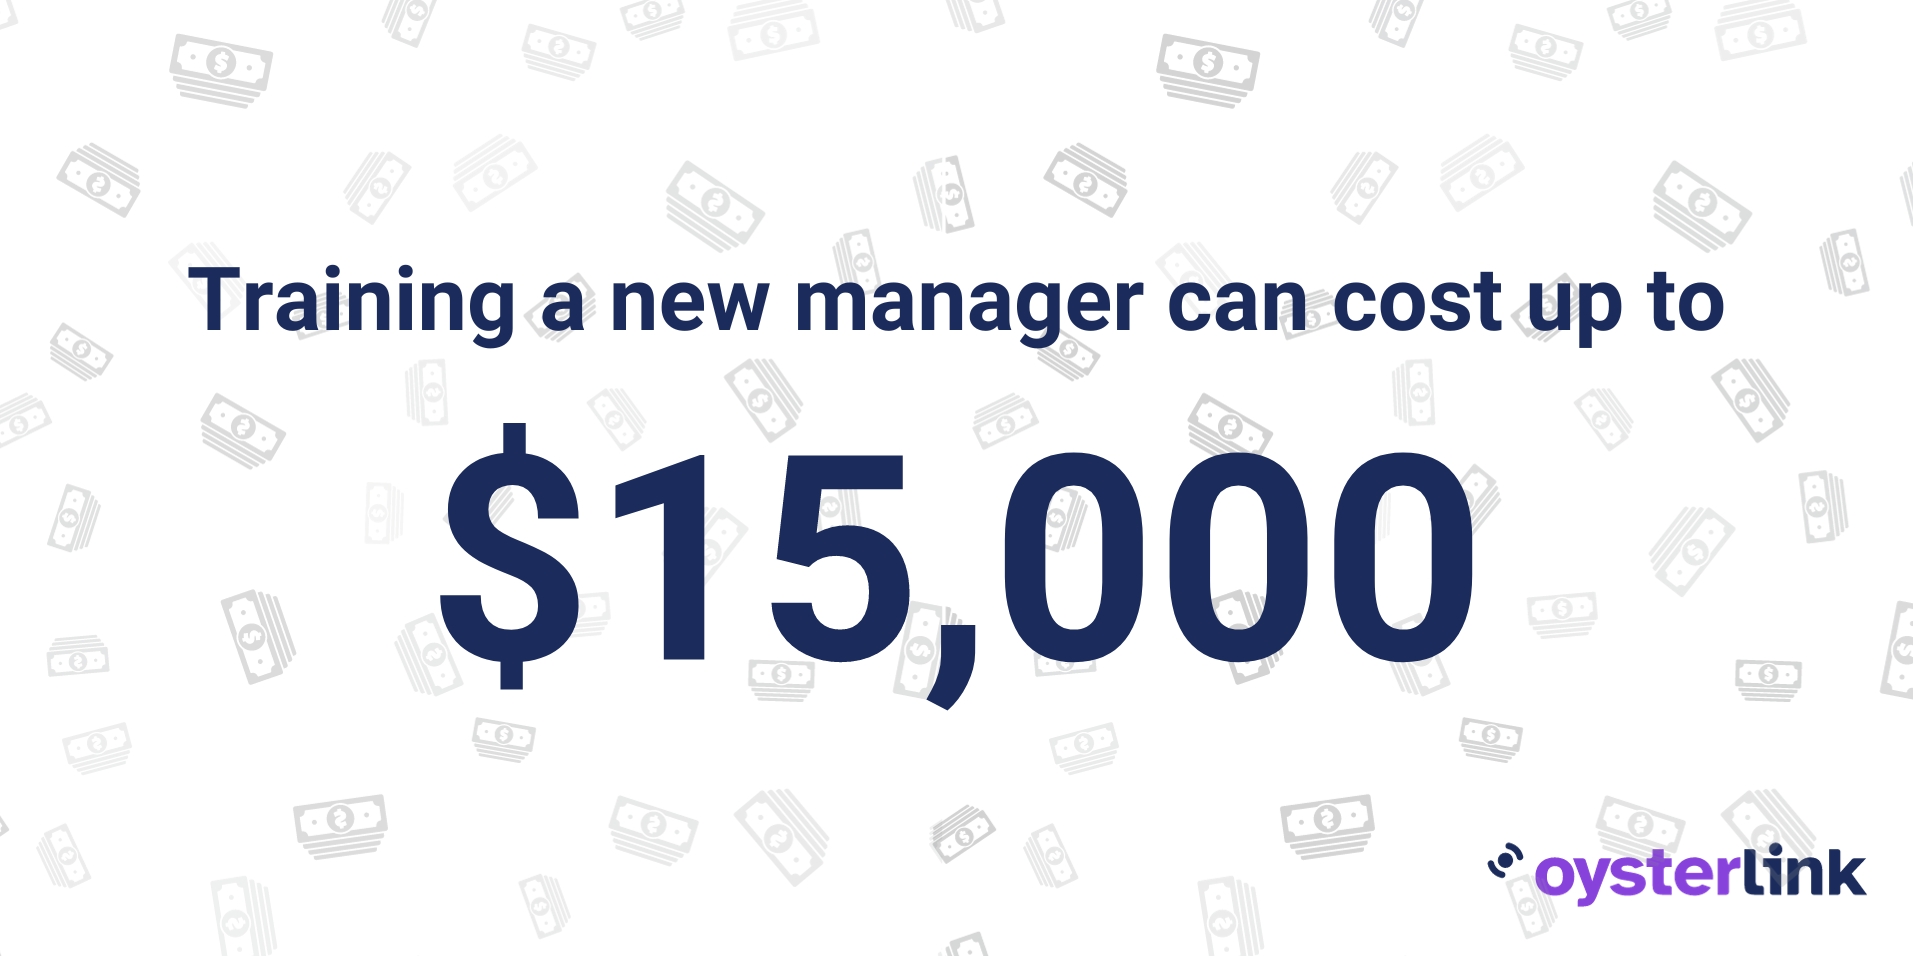 A graphic showing it costs up to $15,000 to train a new manager